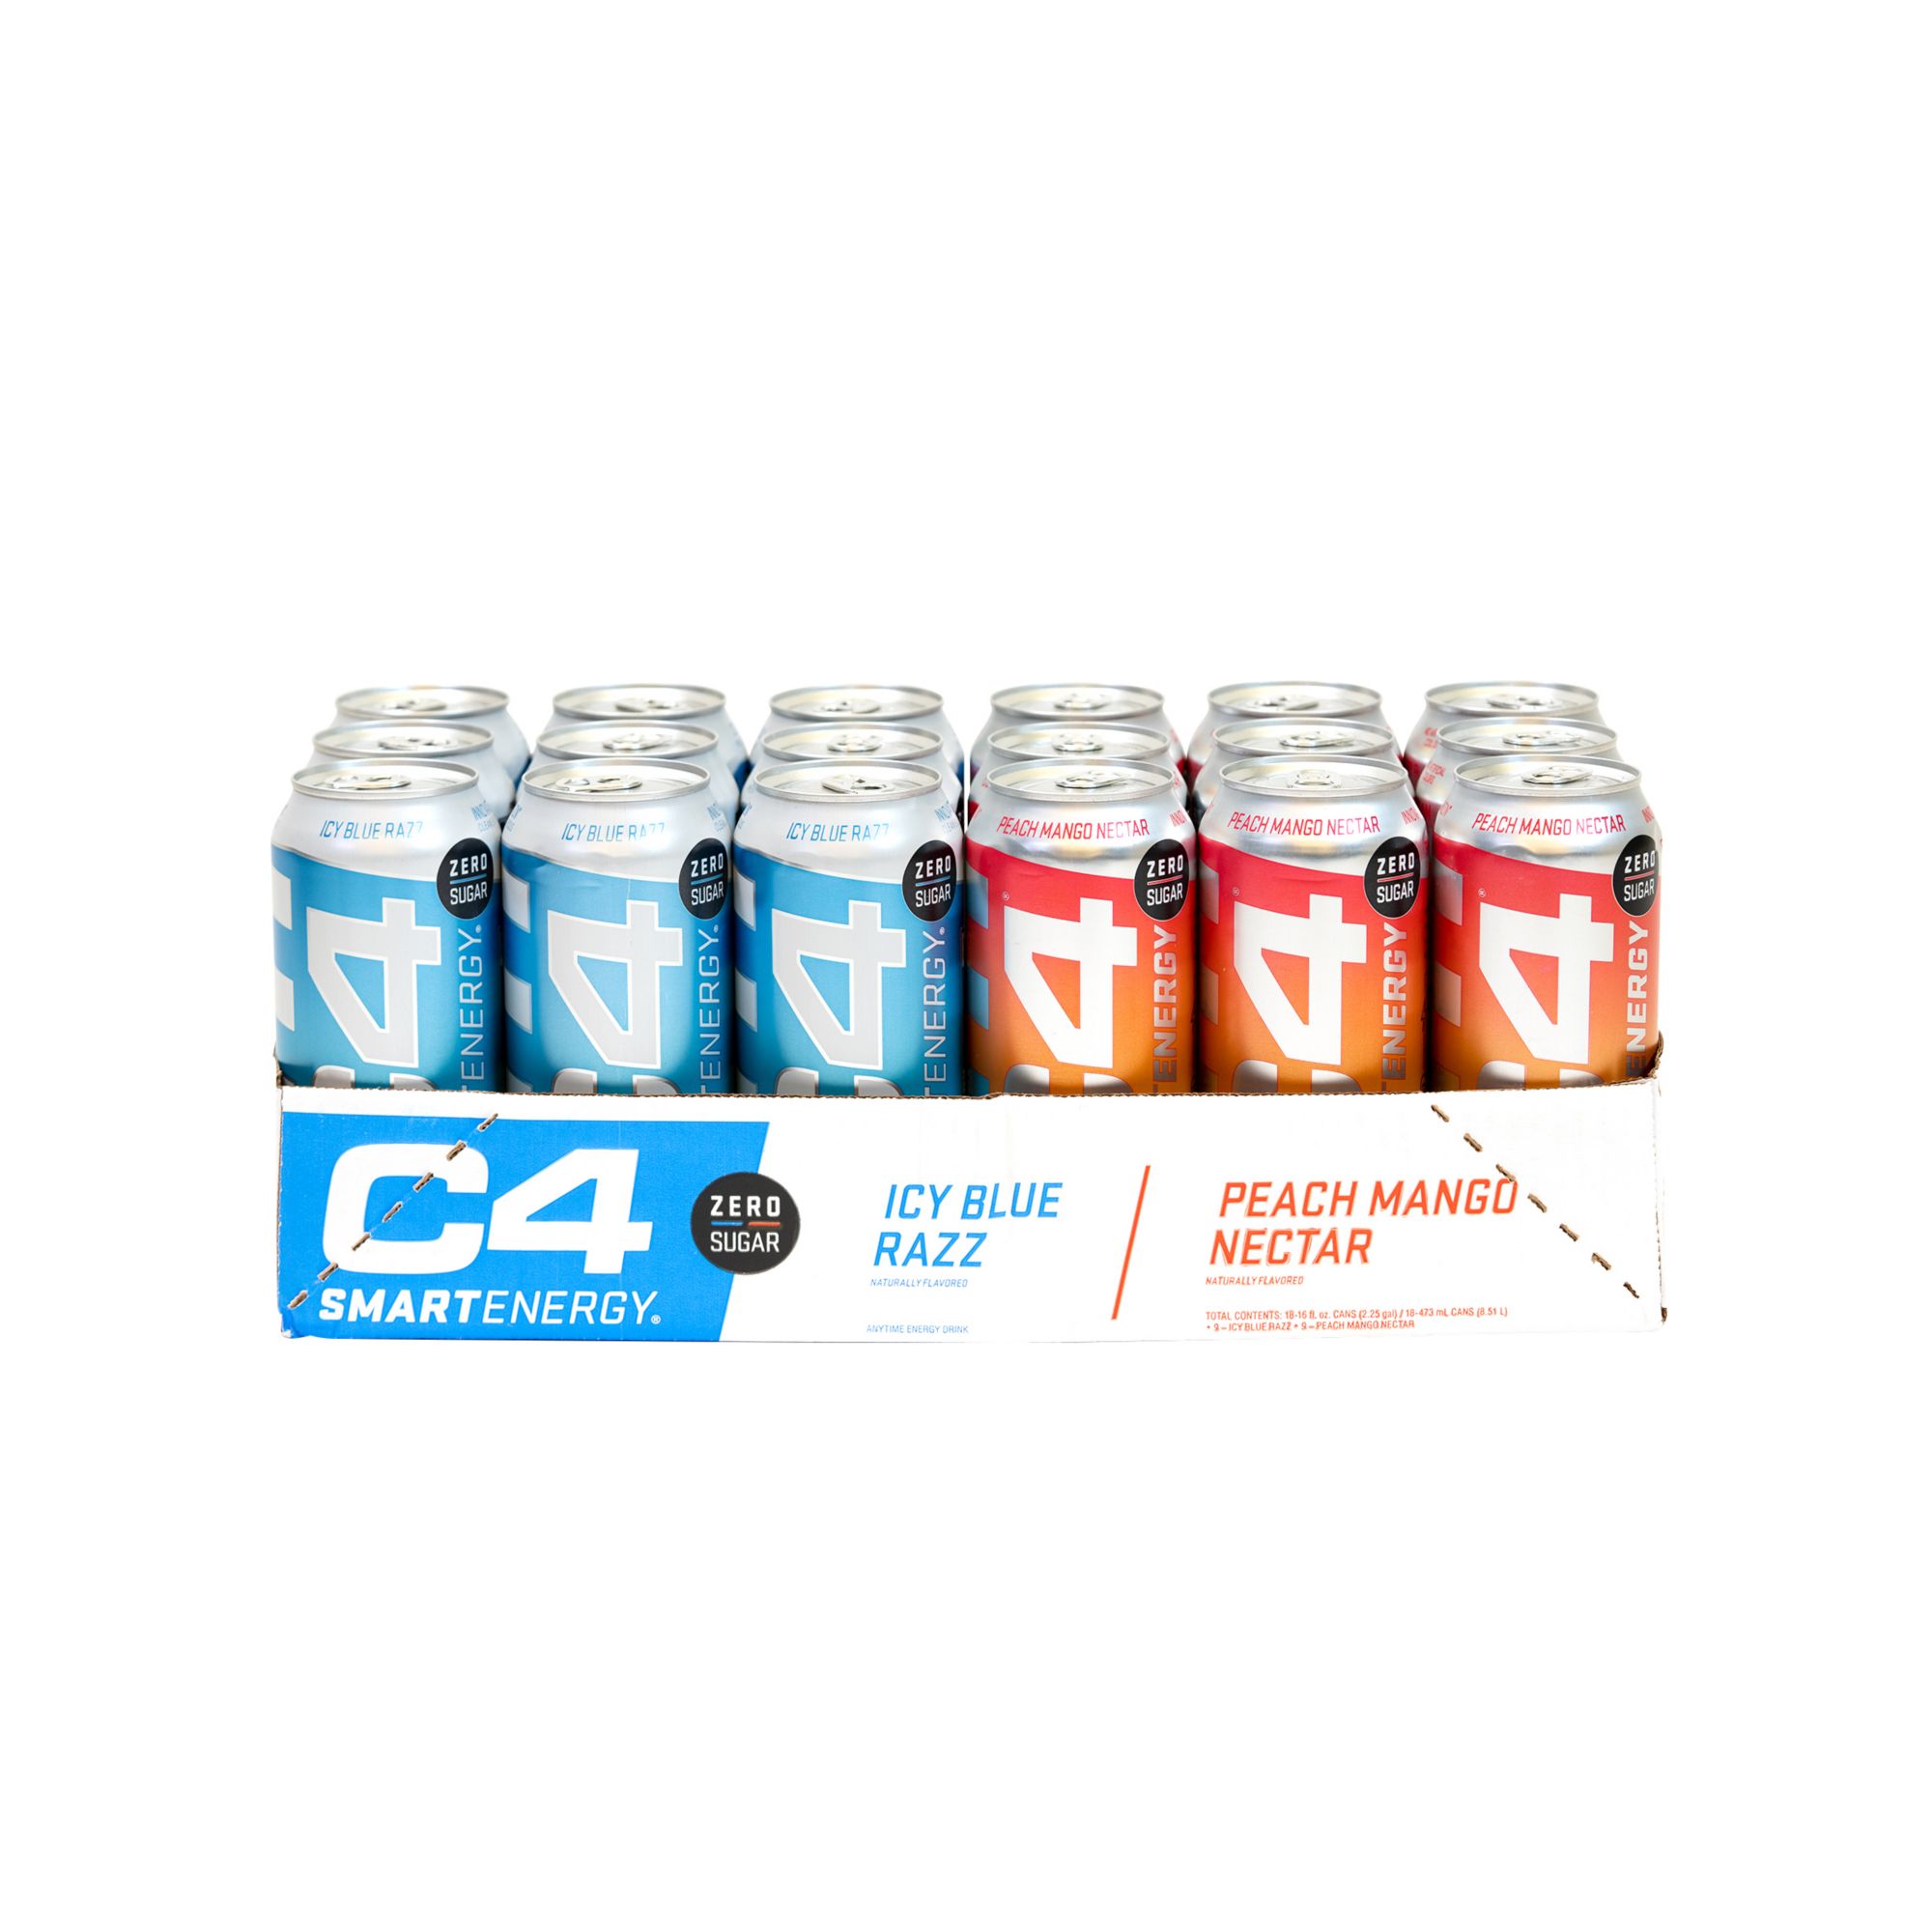 C4 ENERGY® ANNOUNCES BOLD NEW SUPERBRAIN PERFORMANCE CLAIMS FOR ITS SMART  ENERGY PRODUCT LINE